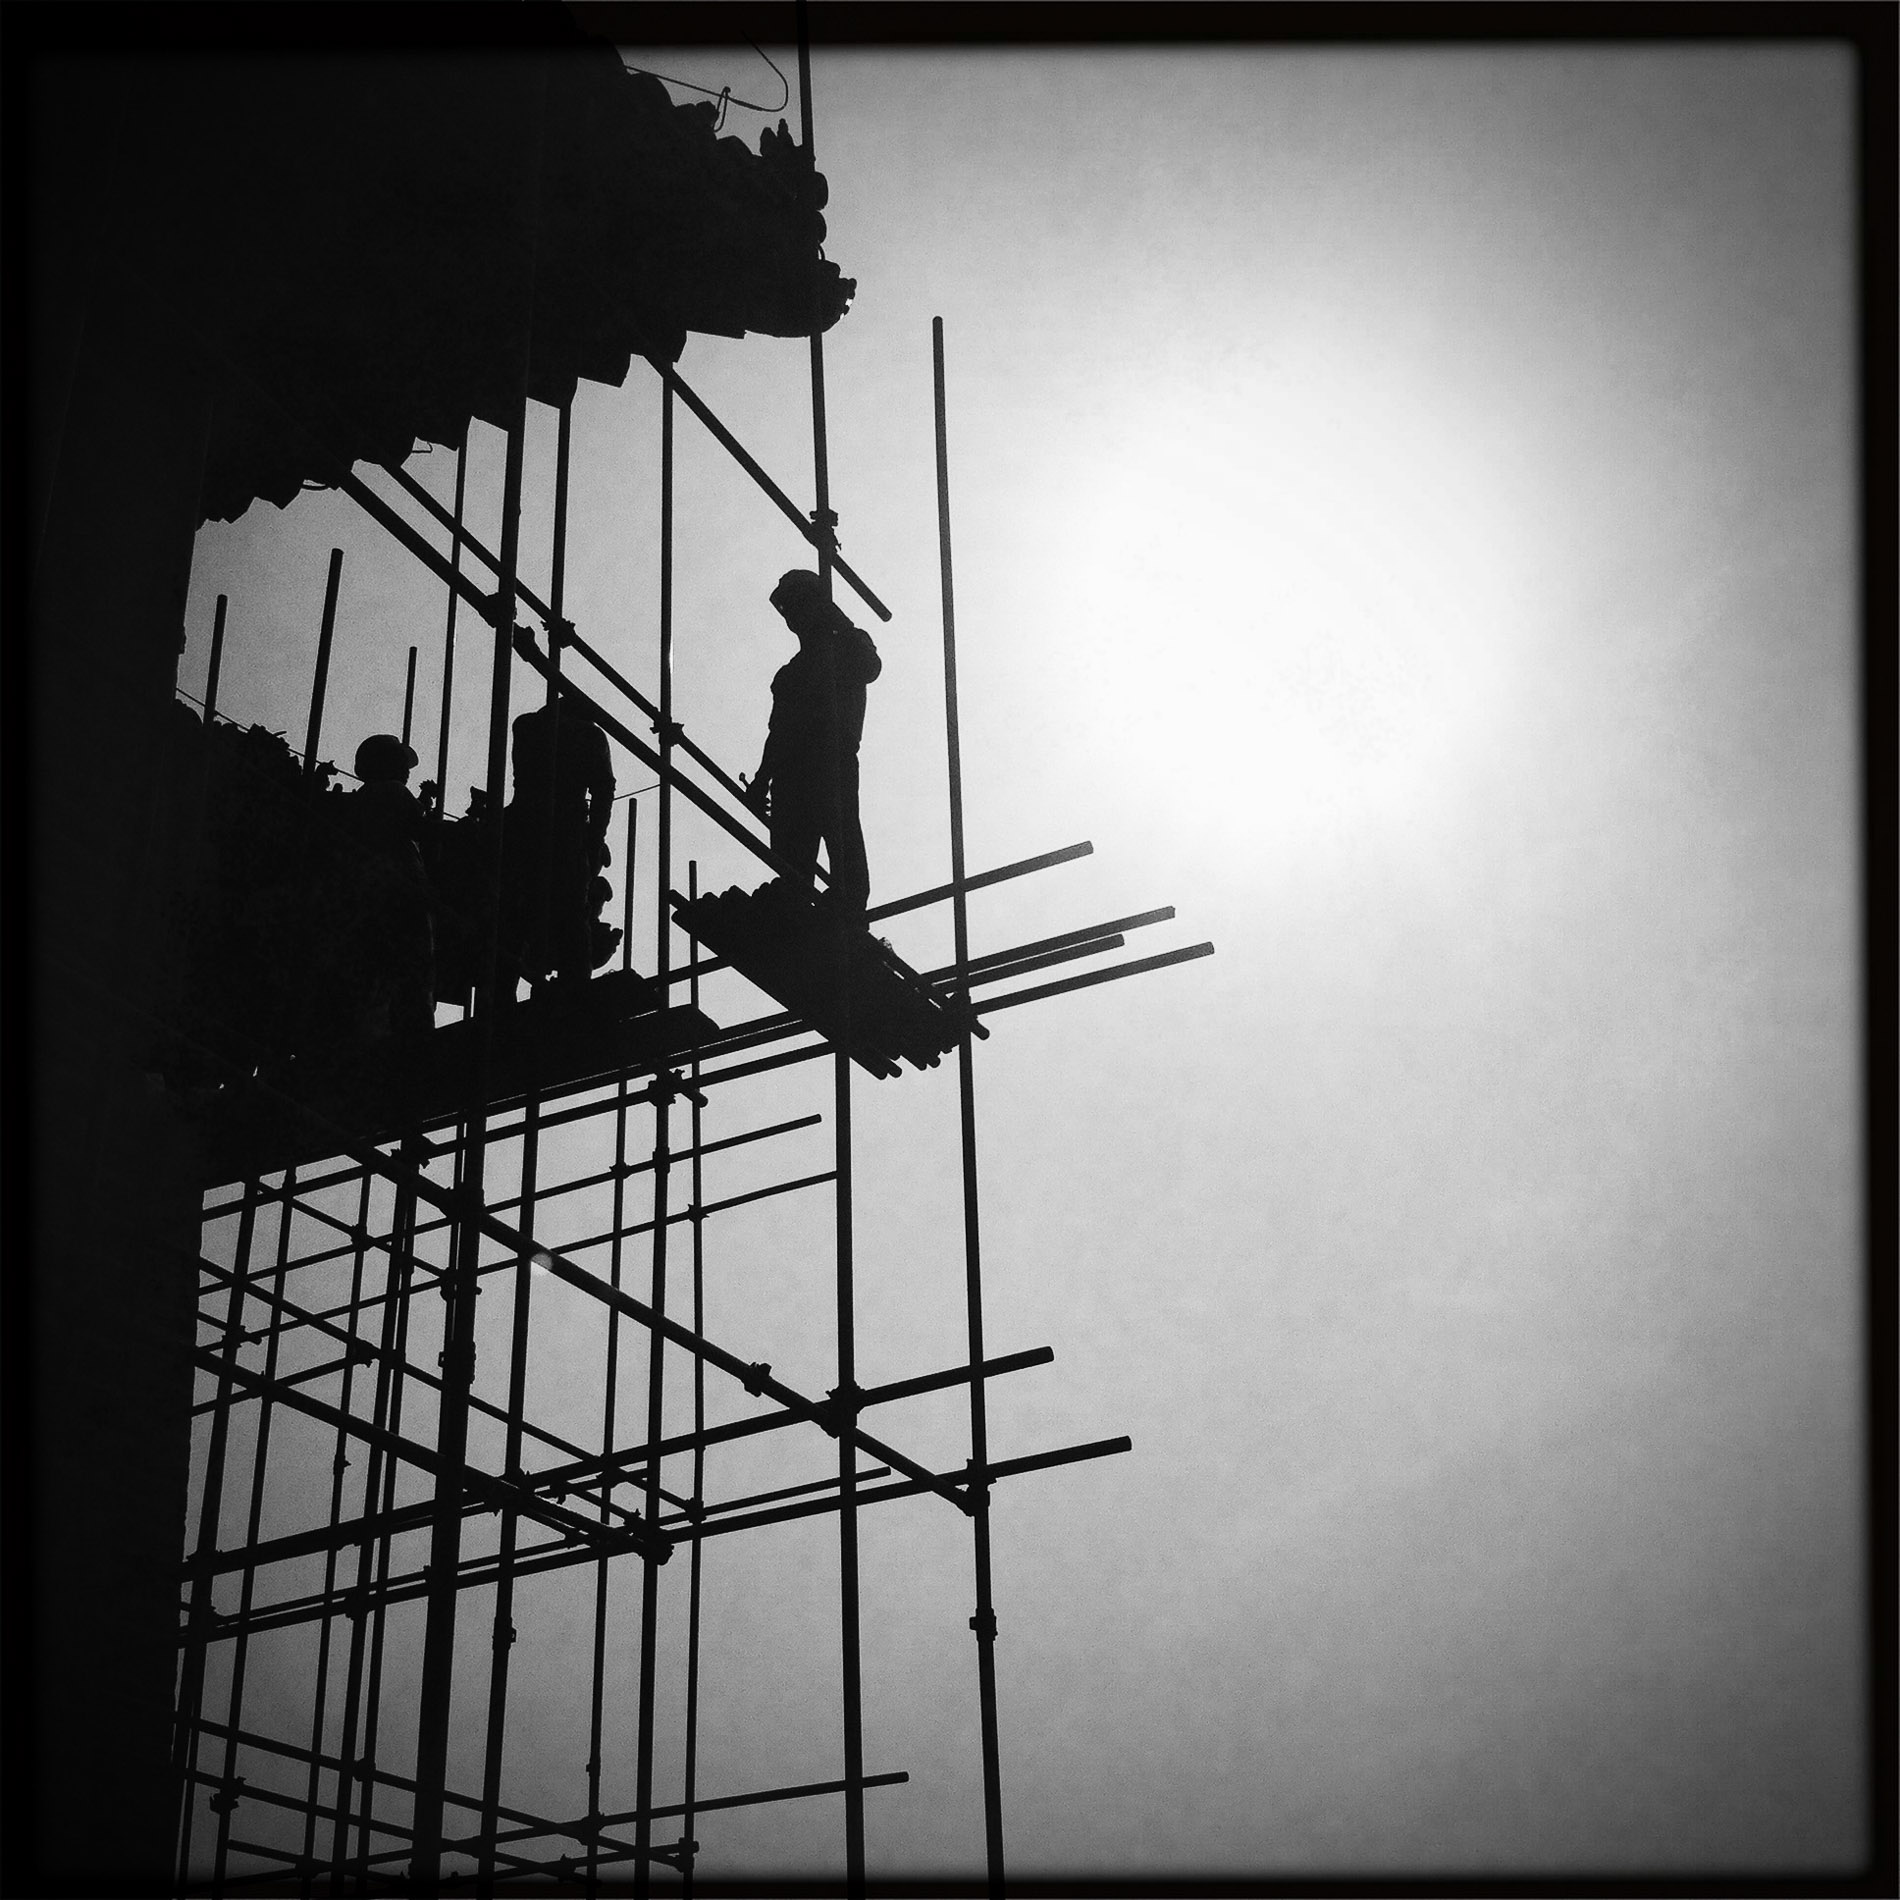 Dongbianmen was scaffolded for the relighting of the building. My other camera is a Hipstermatic.